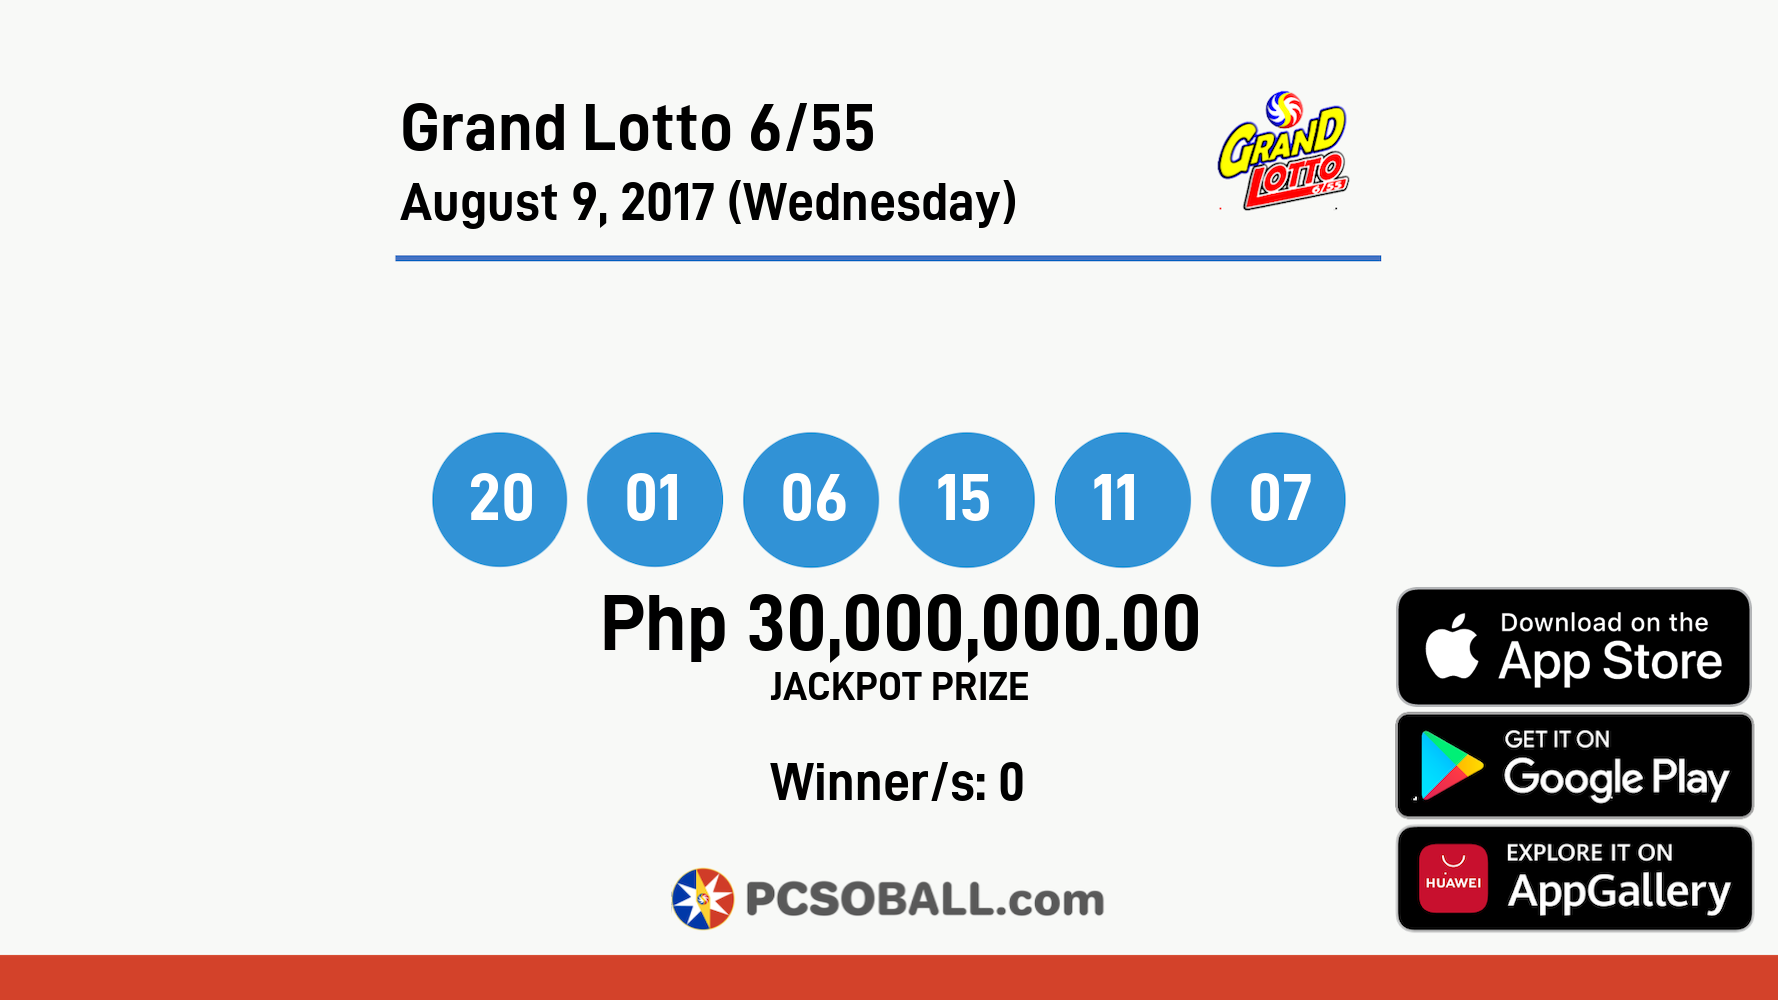 Grand Lotto 6/55 August 9, 2017 (Wednesday) Result